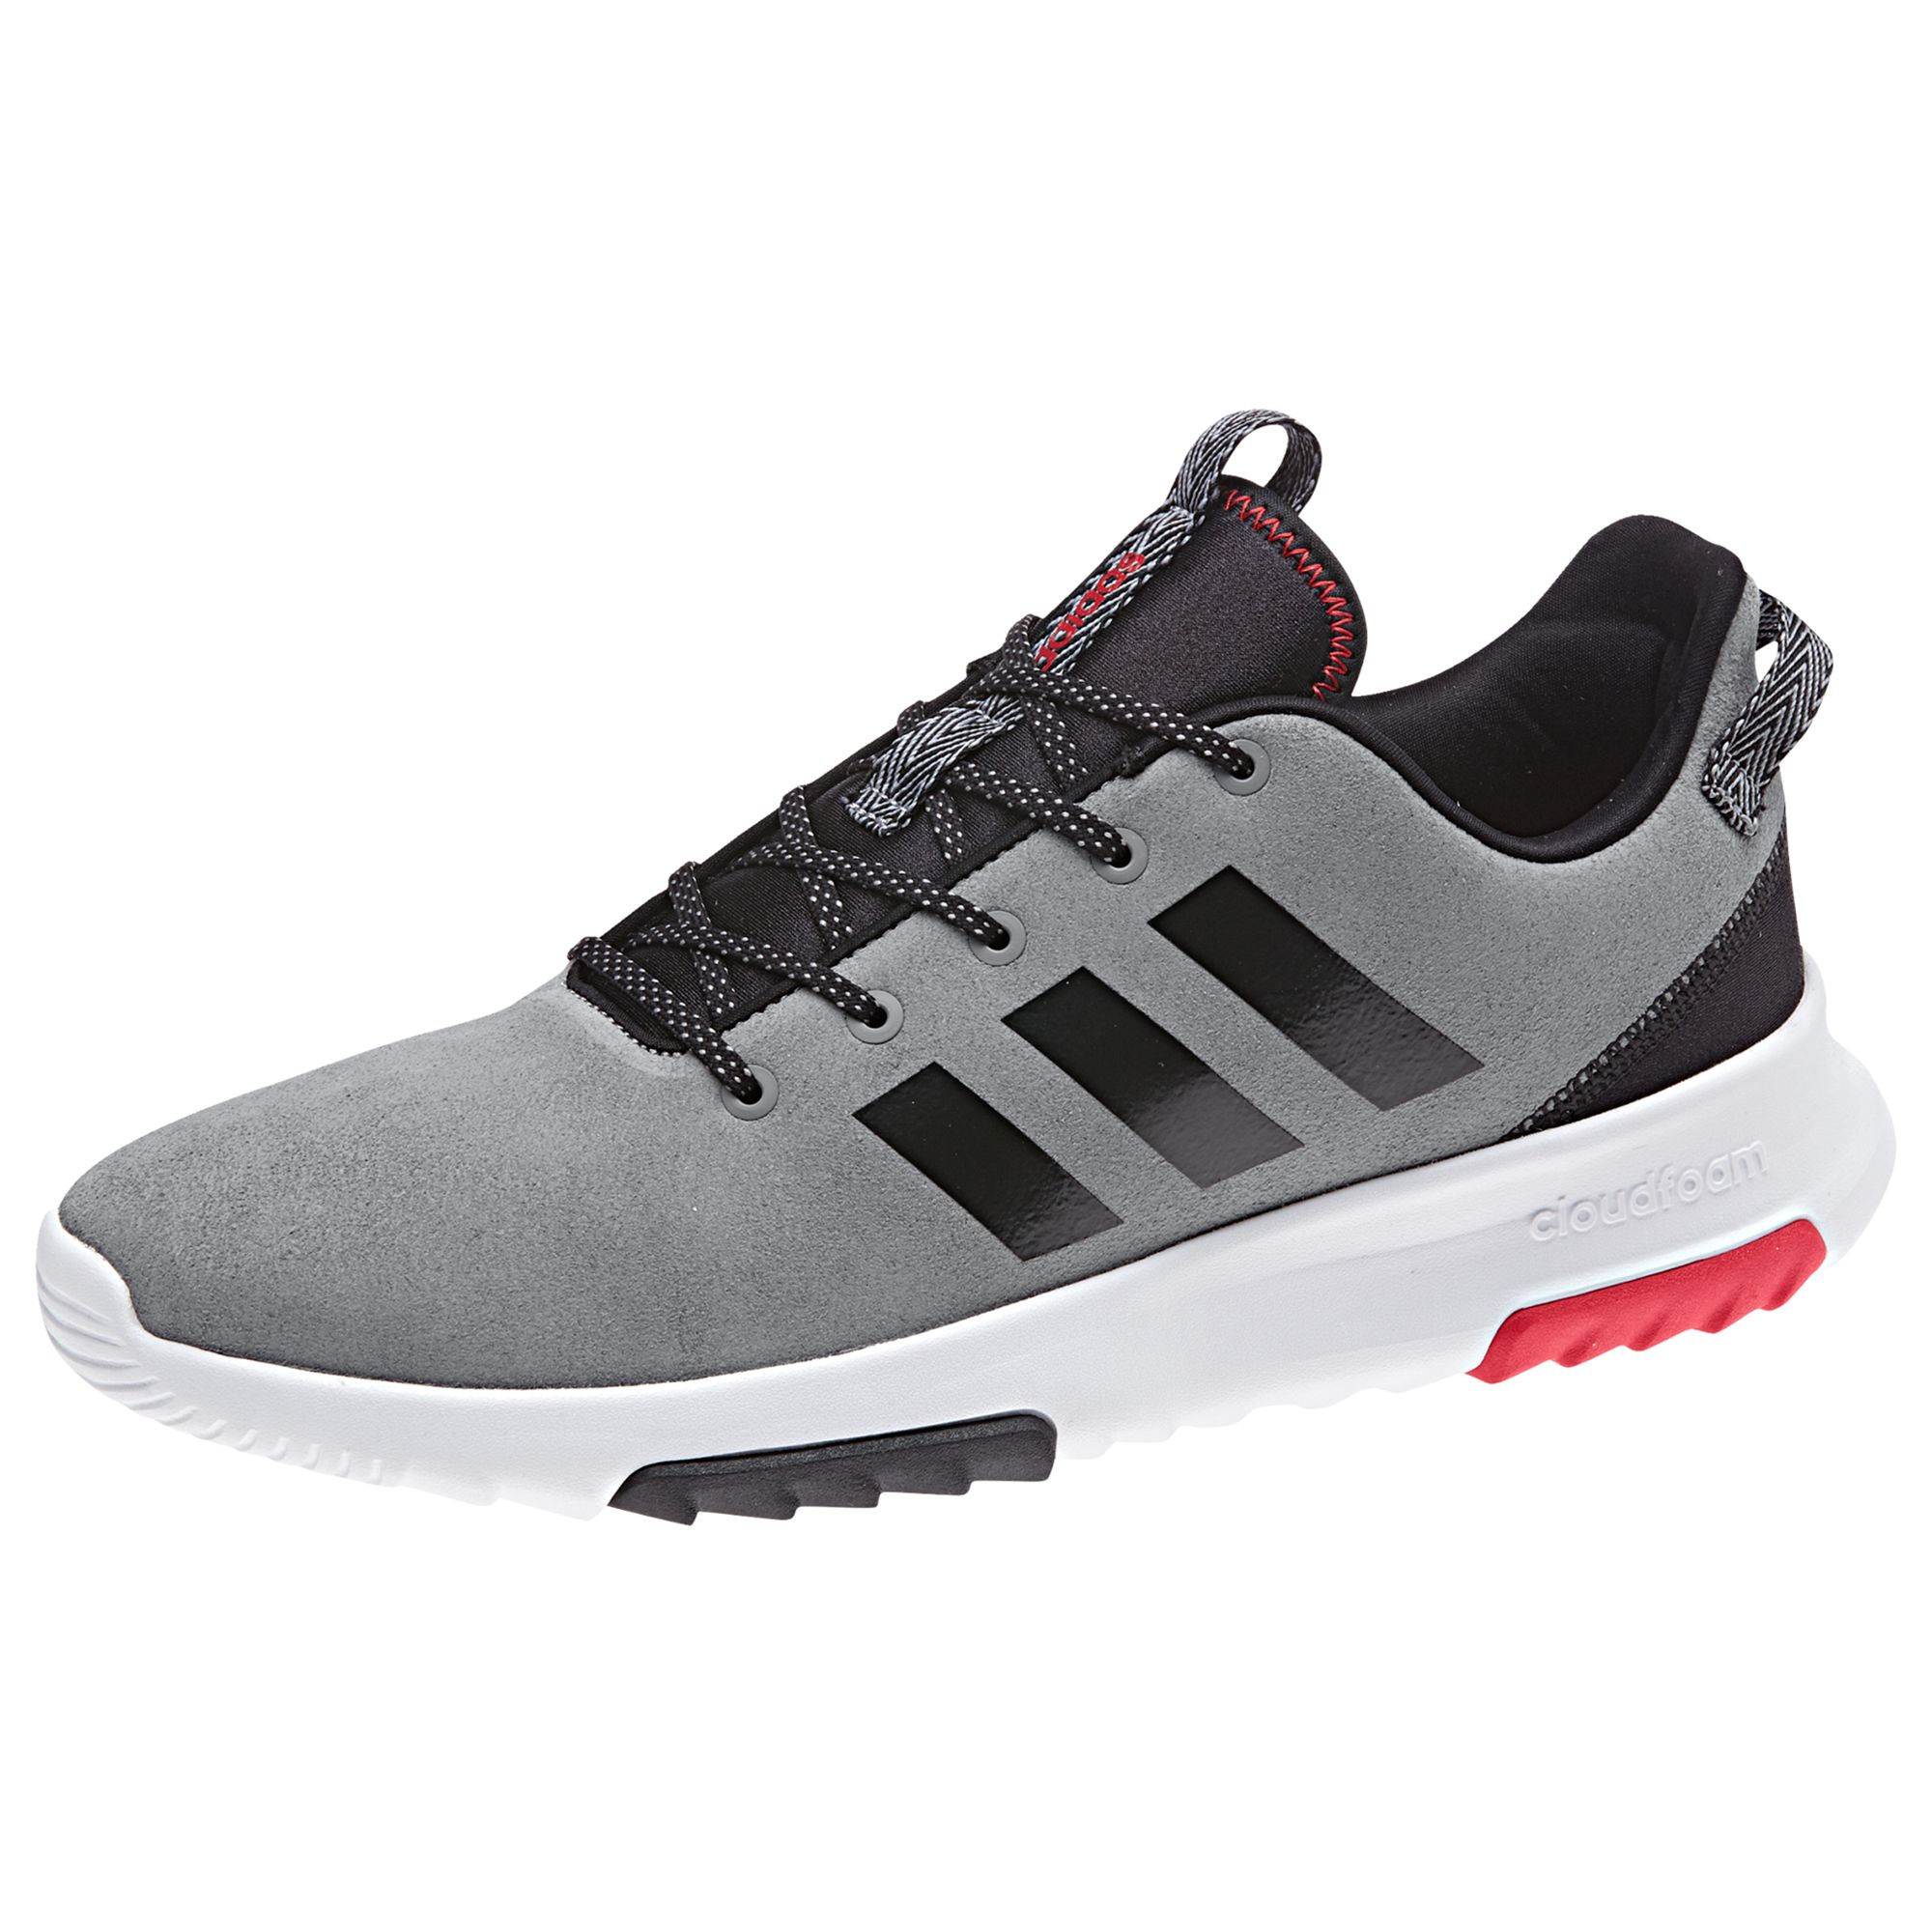 adidas cloudfoam racer tr trainers